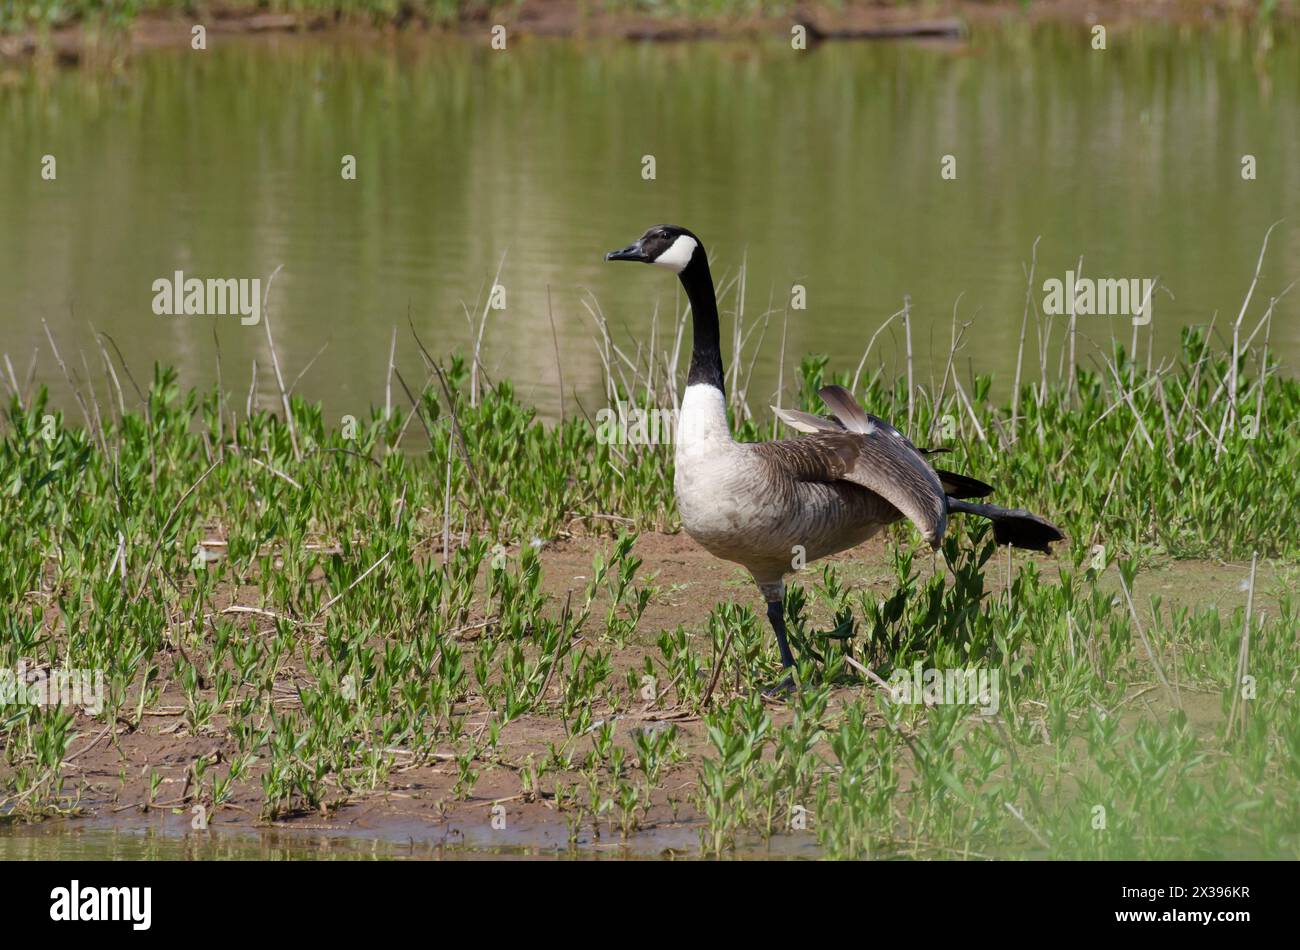 Canada Goose, Branta canadensis, wing and leg stretch Stock Photo